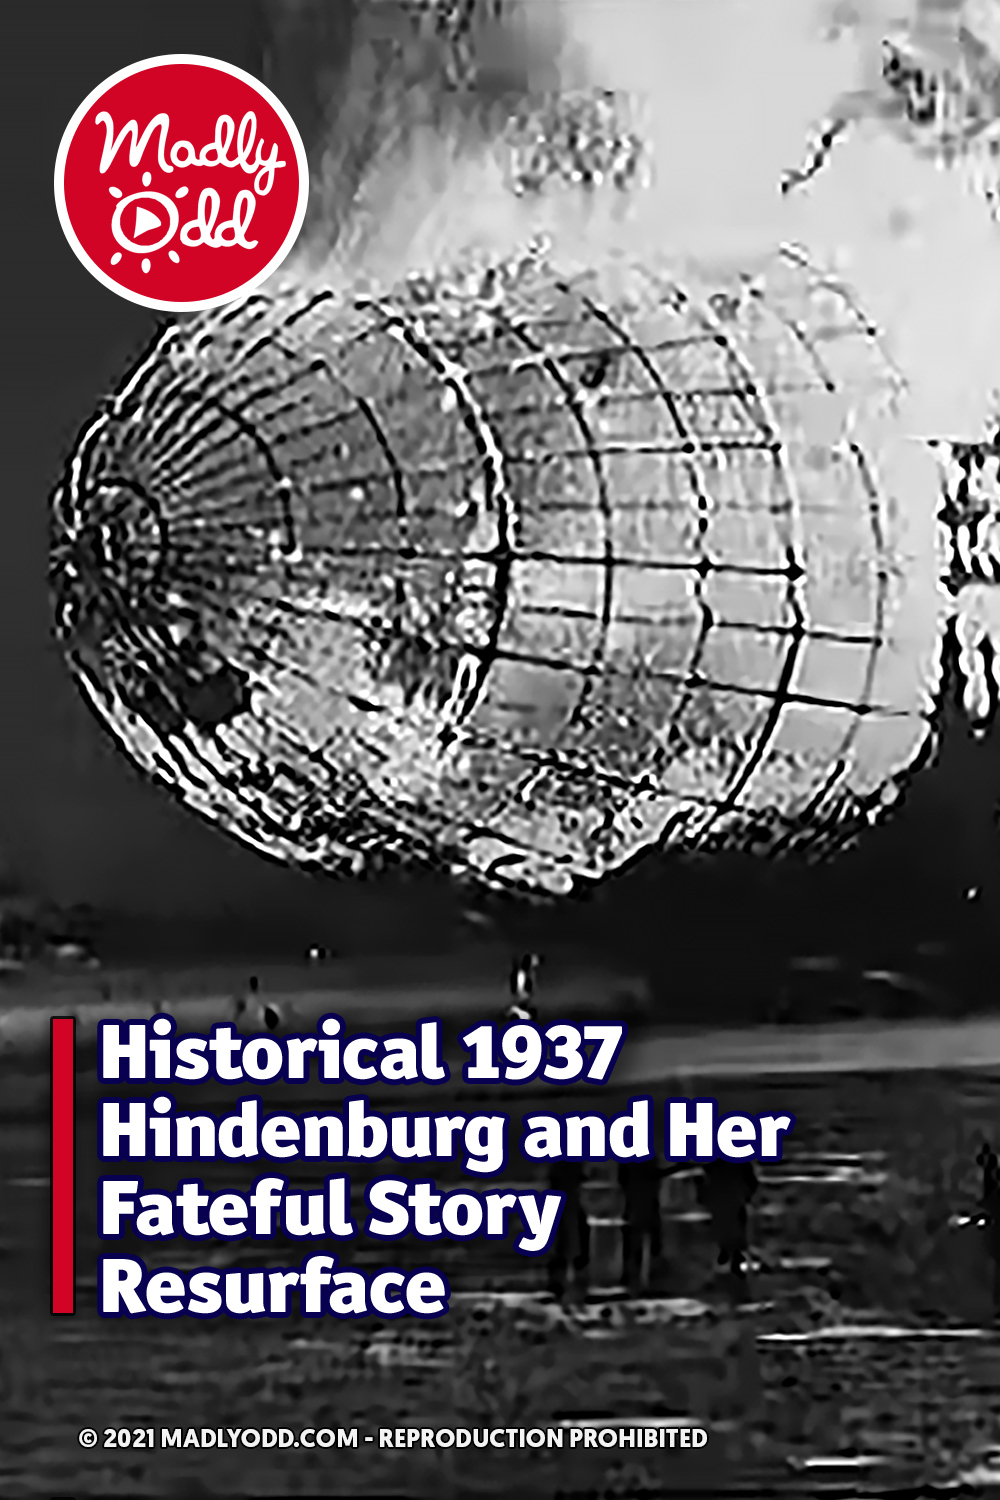 Historical 1937 Hindenburg and Her Fateful Story Resurface